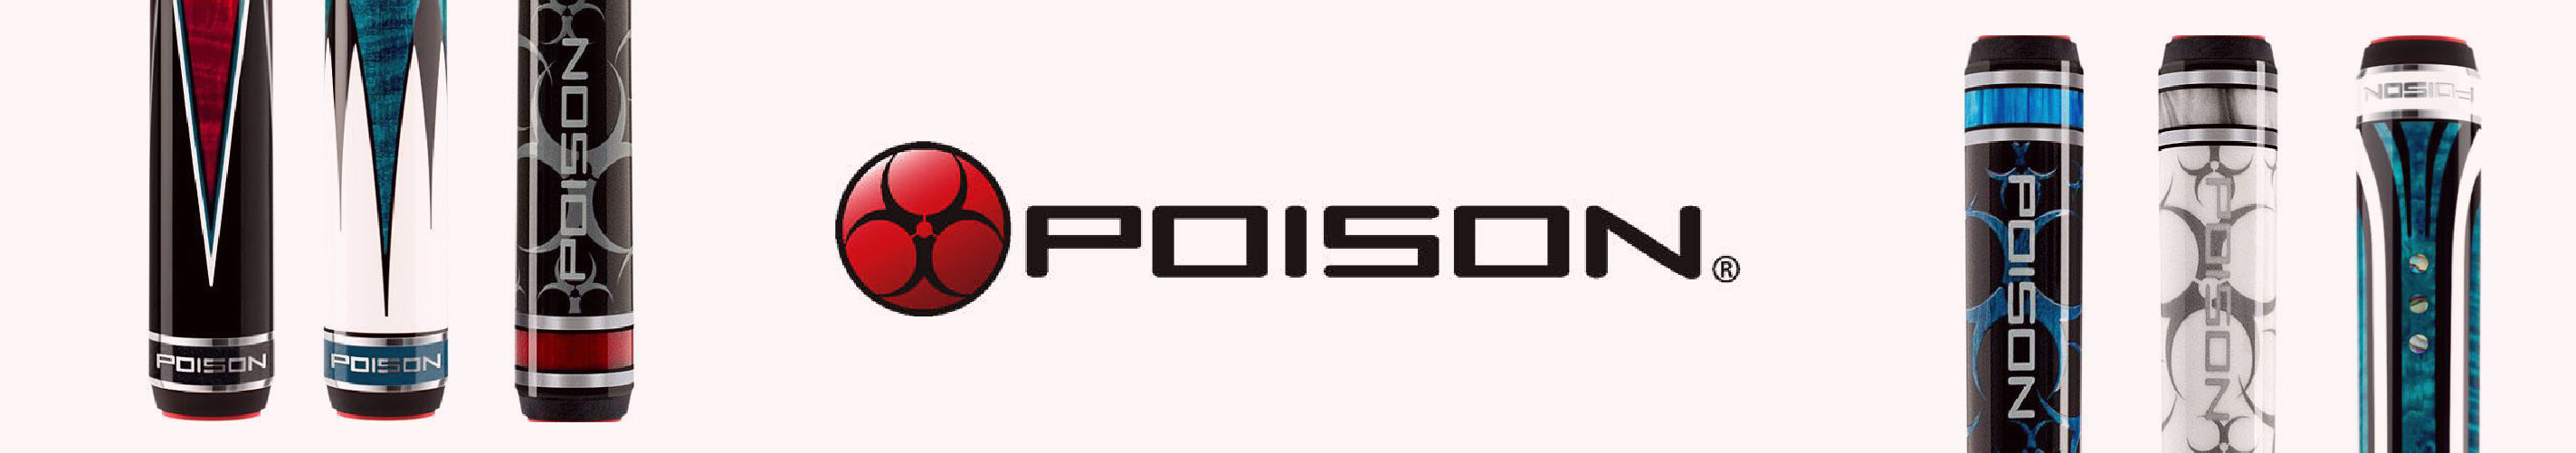 Poison Pool Cues